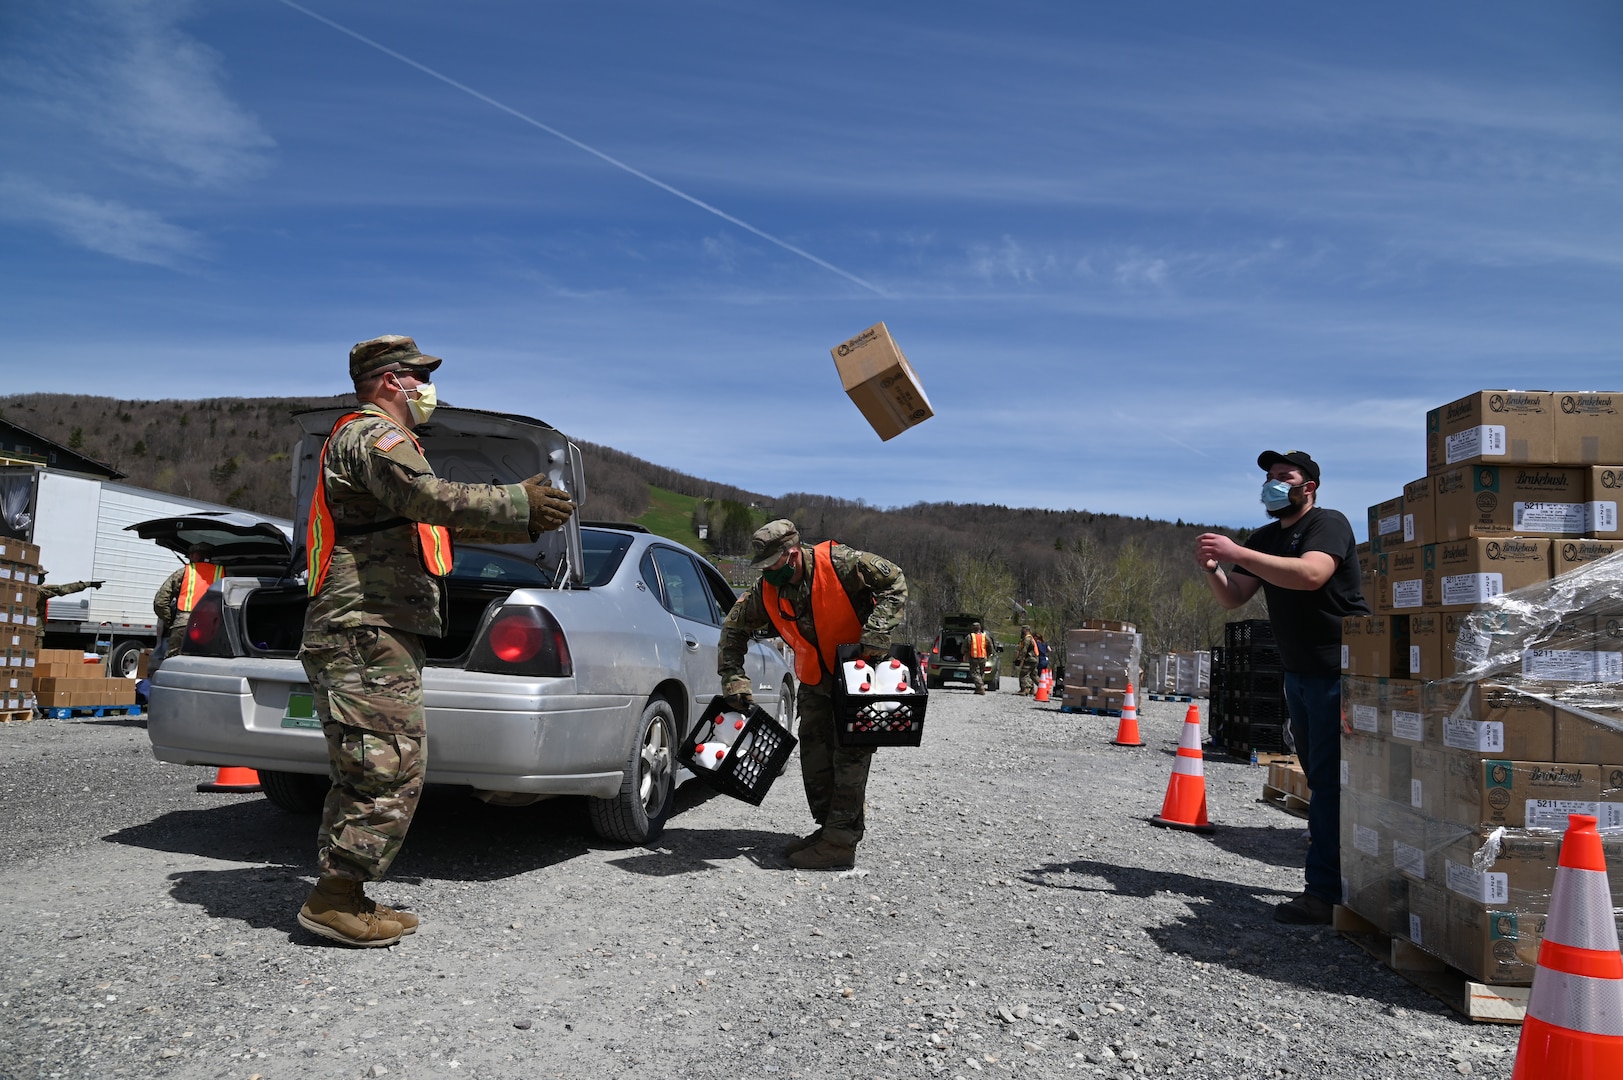 Vermont National Guard Soldiers and state partners load meals into vehicles in a parking lot in Peru, Vermont, May 19, 2020. The Vermont National Guard helps the Vermont Food Bank "Farmers to Families" program and Vermont Emergency Management deliver fresh produce, dairy and prepared meals. (U.S. Air National Guard photo by Tech. Sgt. Garth Dunkel)